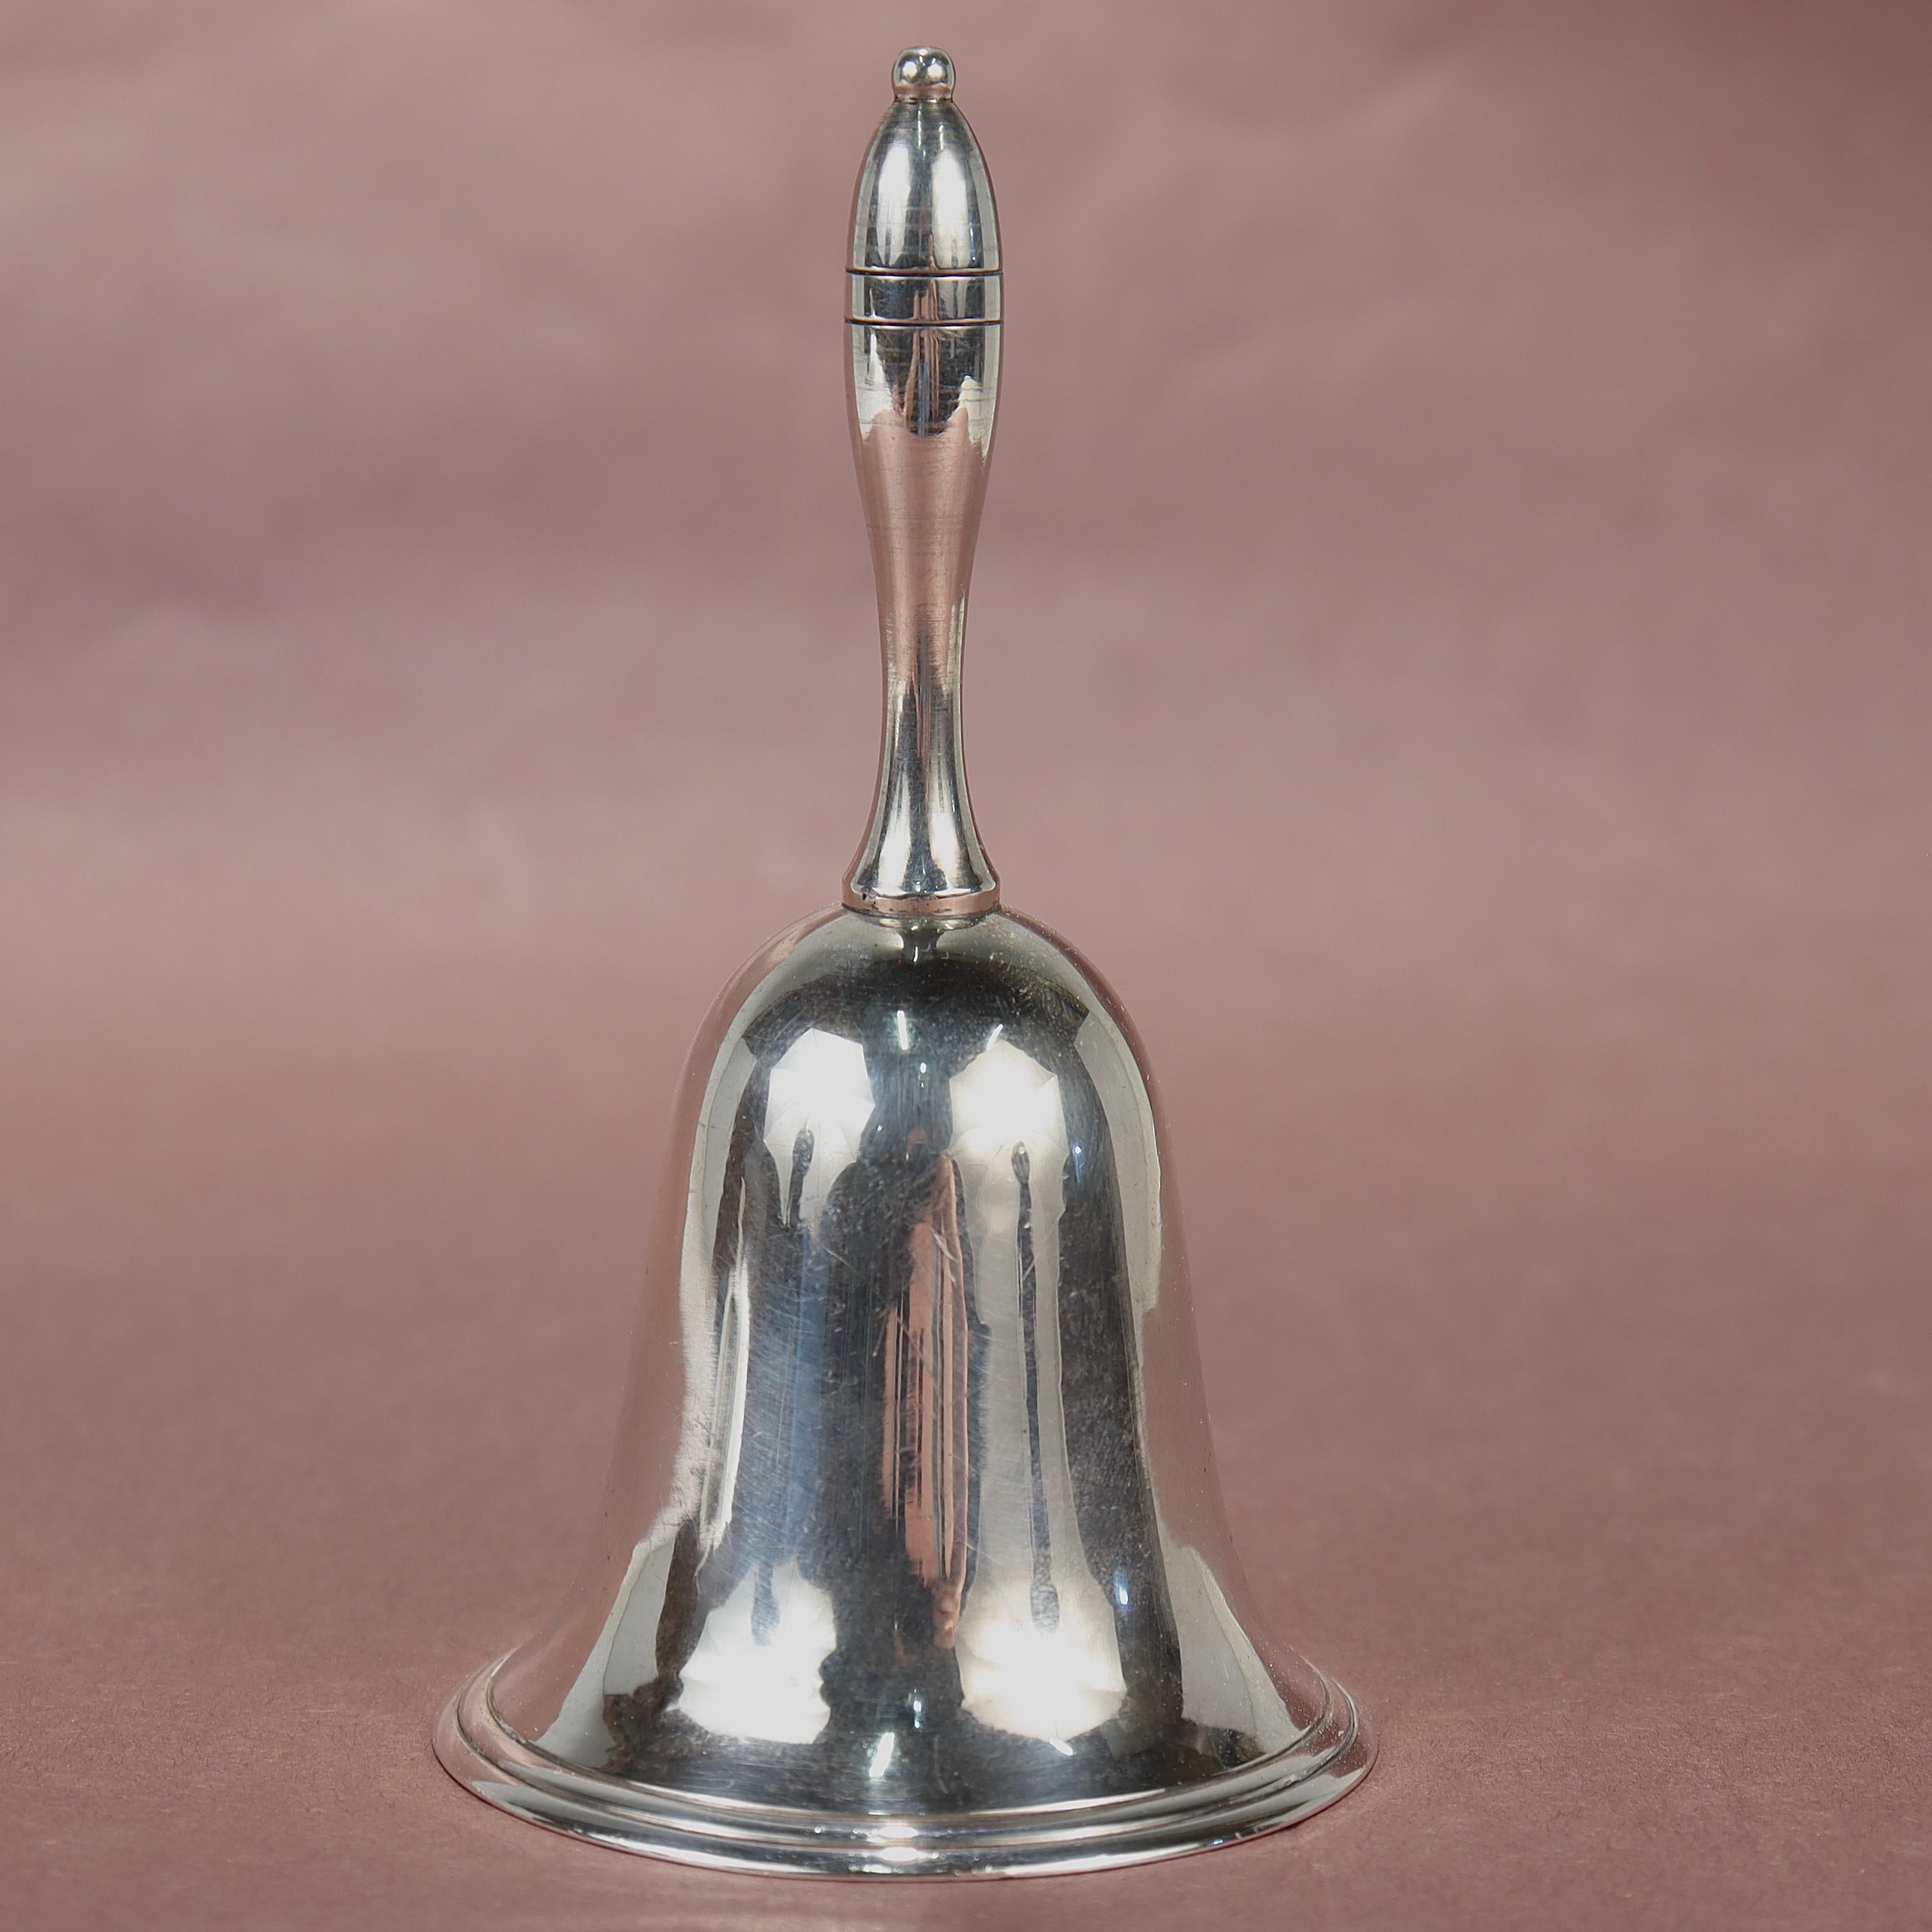 A fine antique Japanese silver bell.

In .950 sterling silver. 

Simply a great Japanese silver bell!

Date:
20th Century

Overall Condition:
It is in overall good, as-pictured, used estate condition.

Condition Details:
There are some light